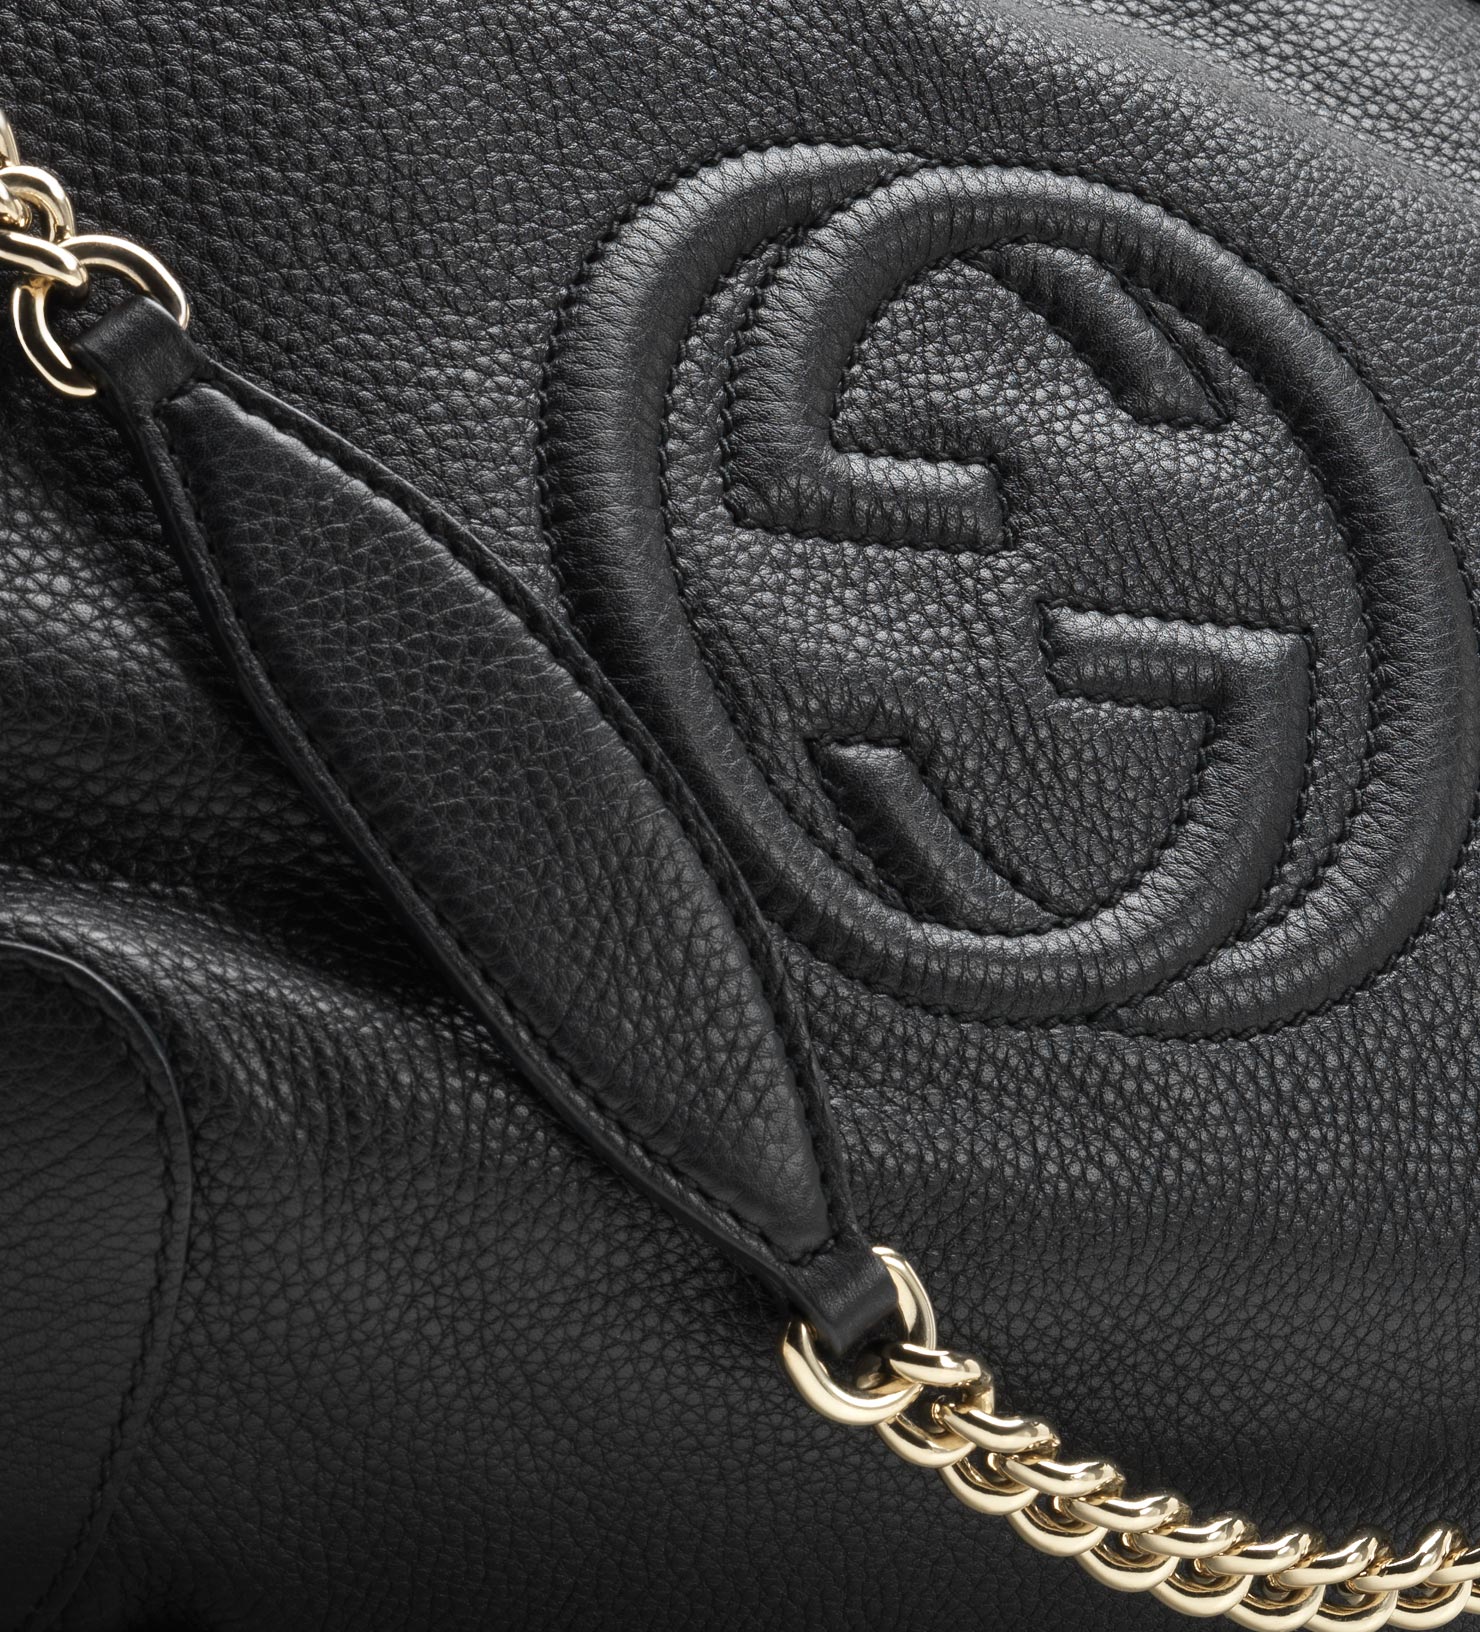 Lyst - Gucci Soho Black Leather Shoulder Bag with Chain Strap in Black